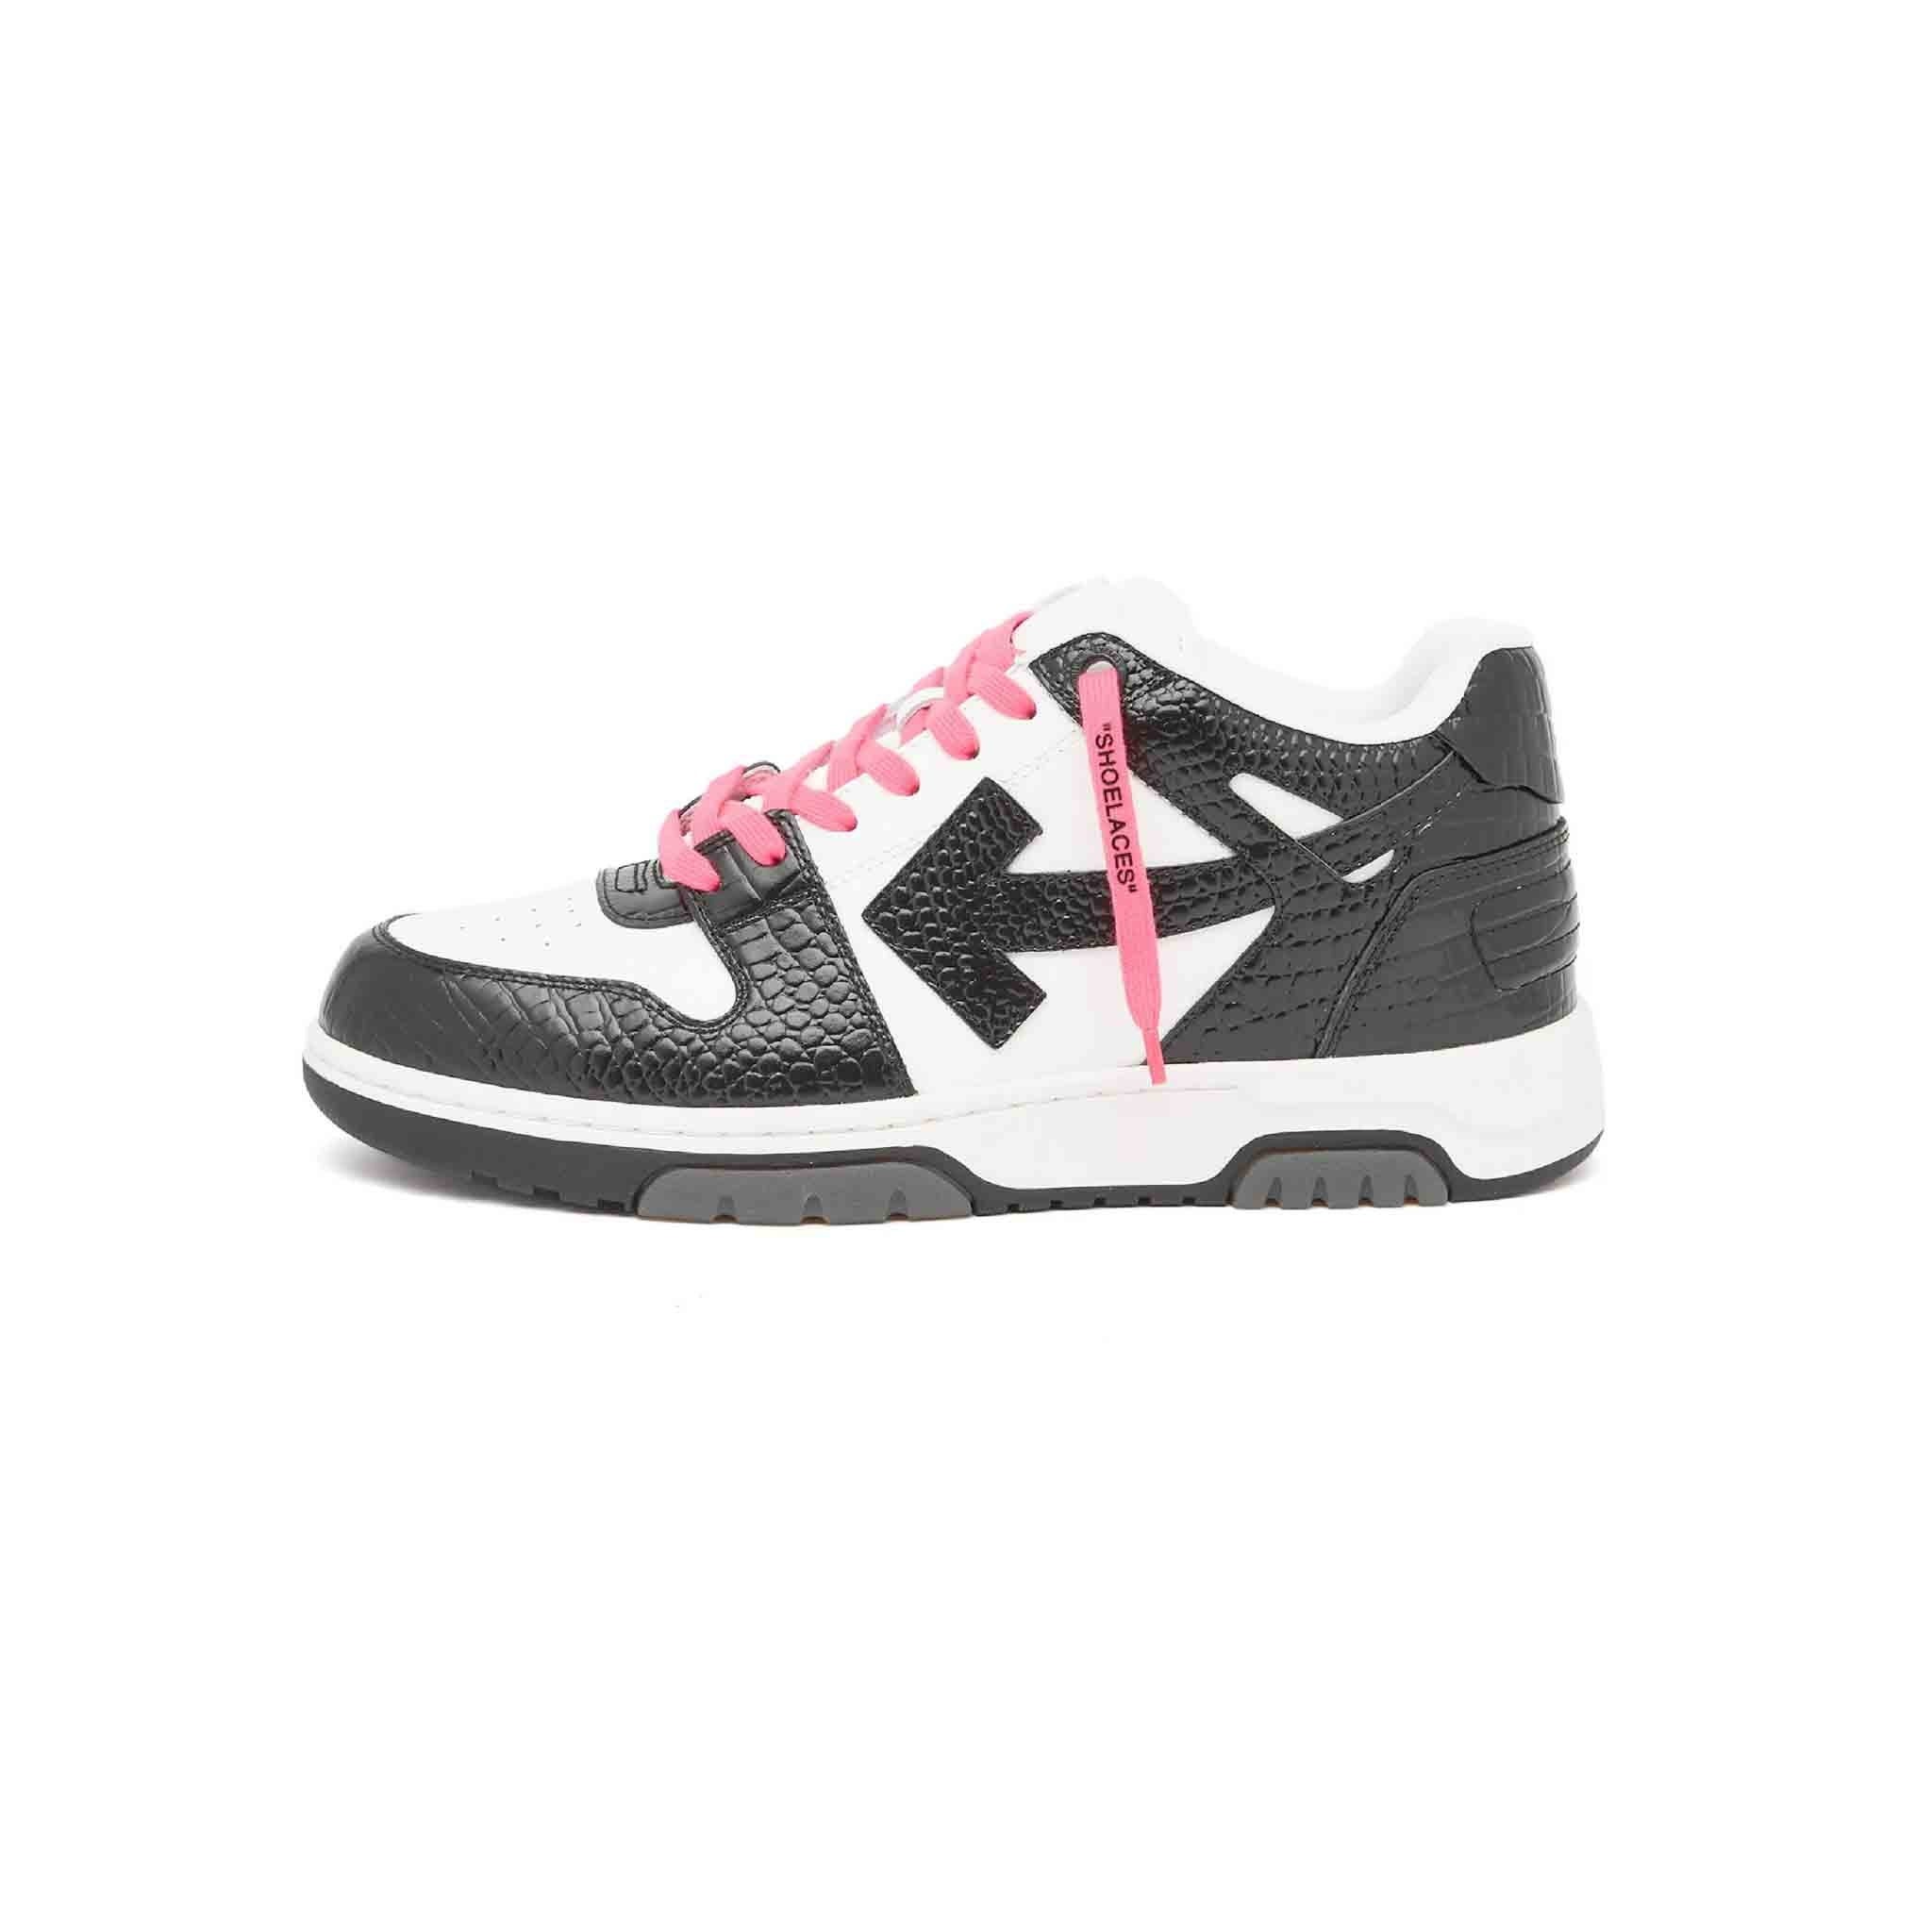 OFF-WHITE Womens Out Of Office Croc Print in White/Black